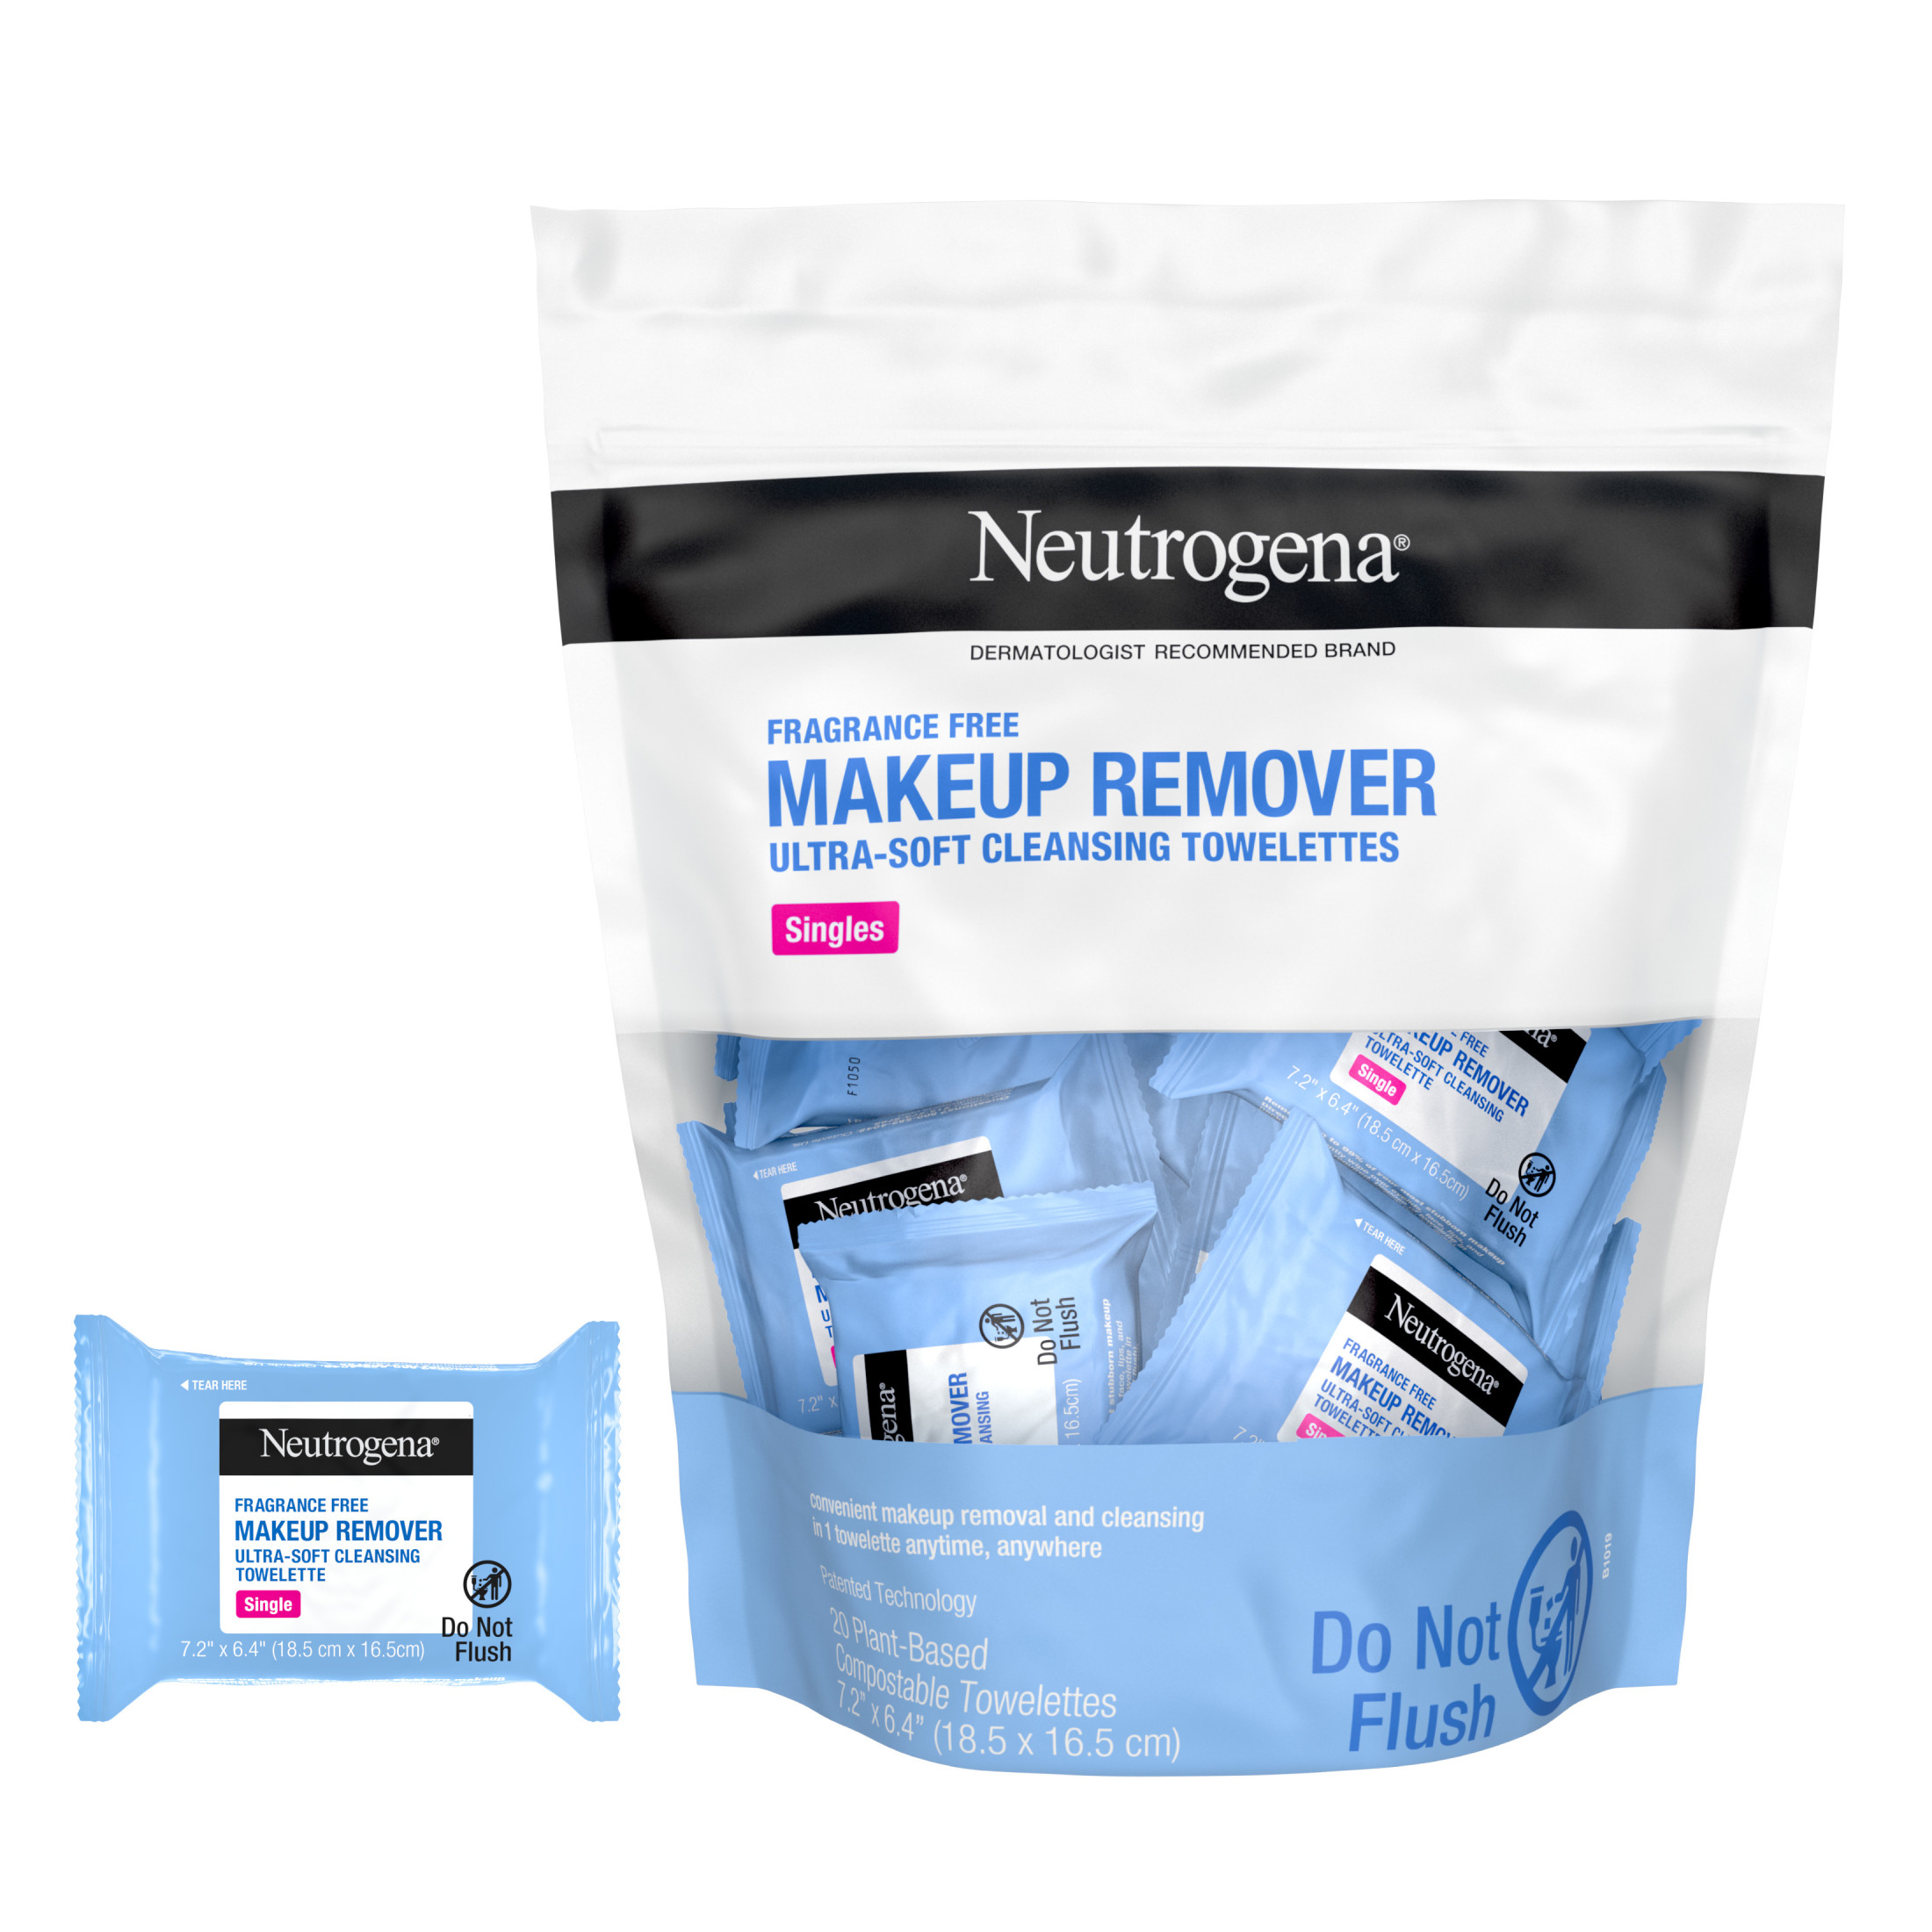 Neutrogena Fragrance-Free Makeup Remover Face Wipe Singles, 20 Ct - image 3 of 11